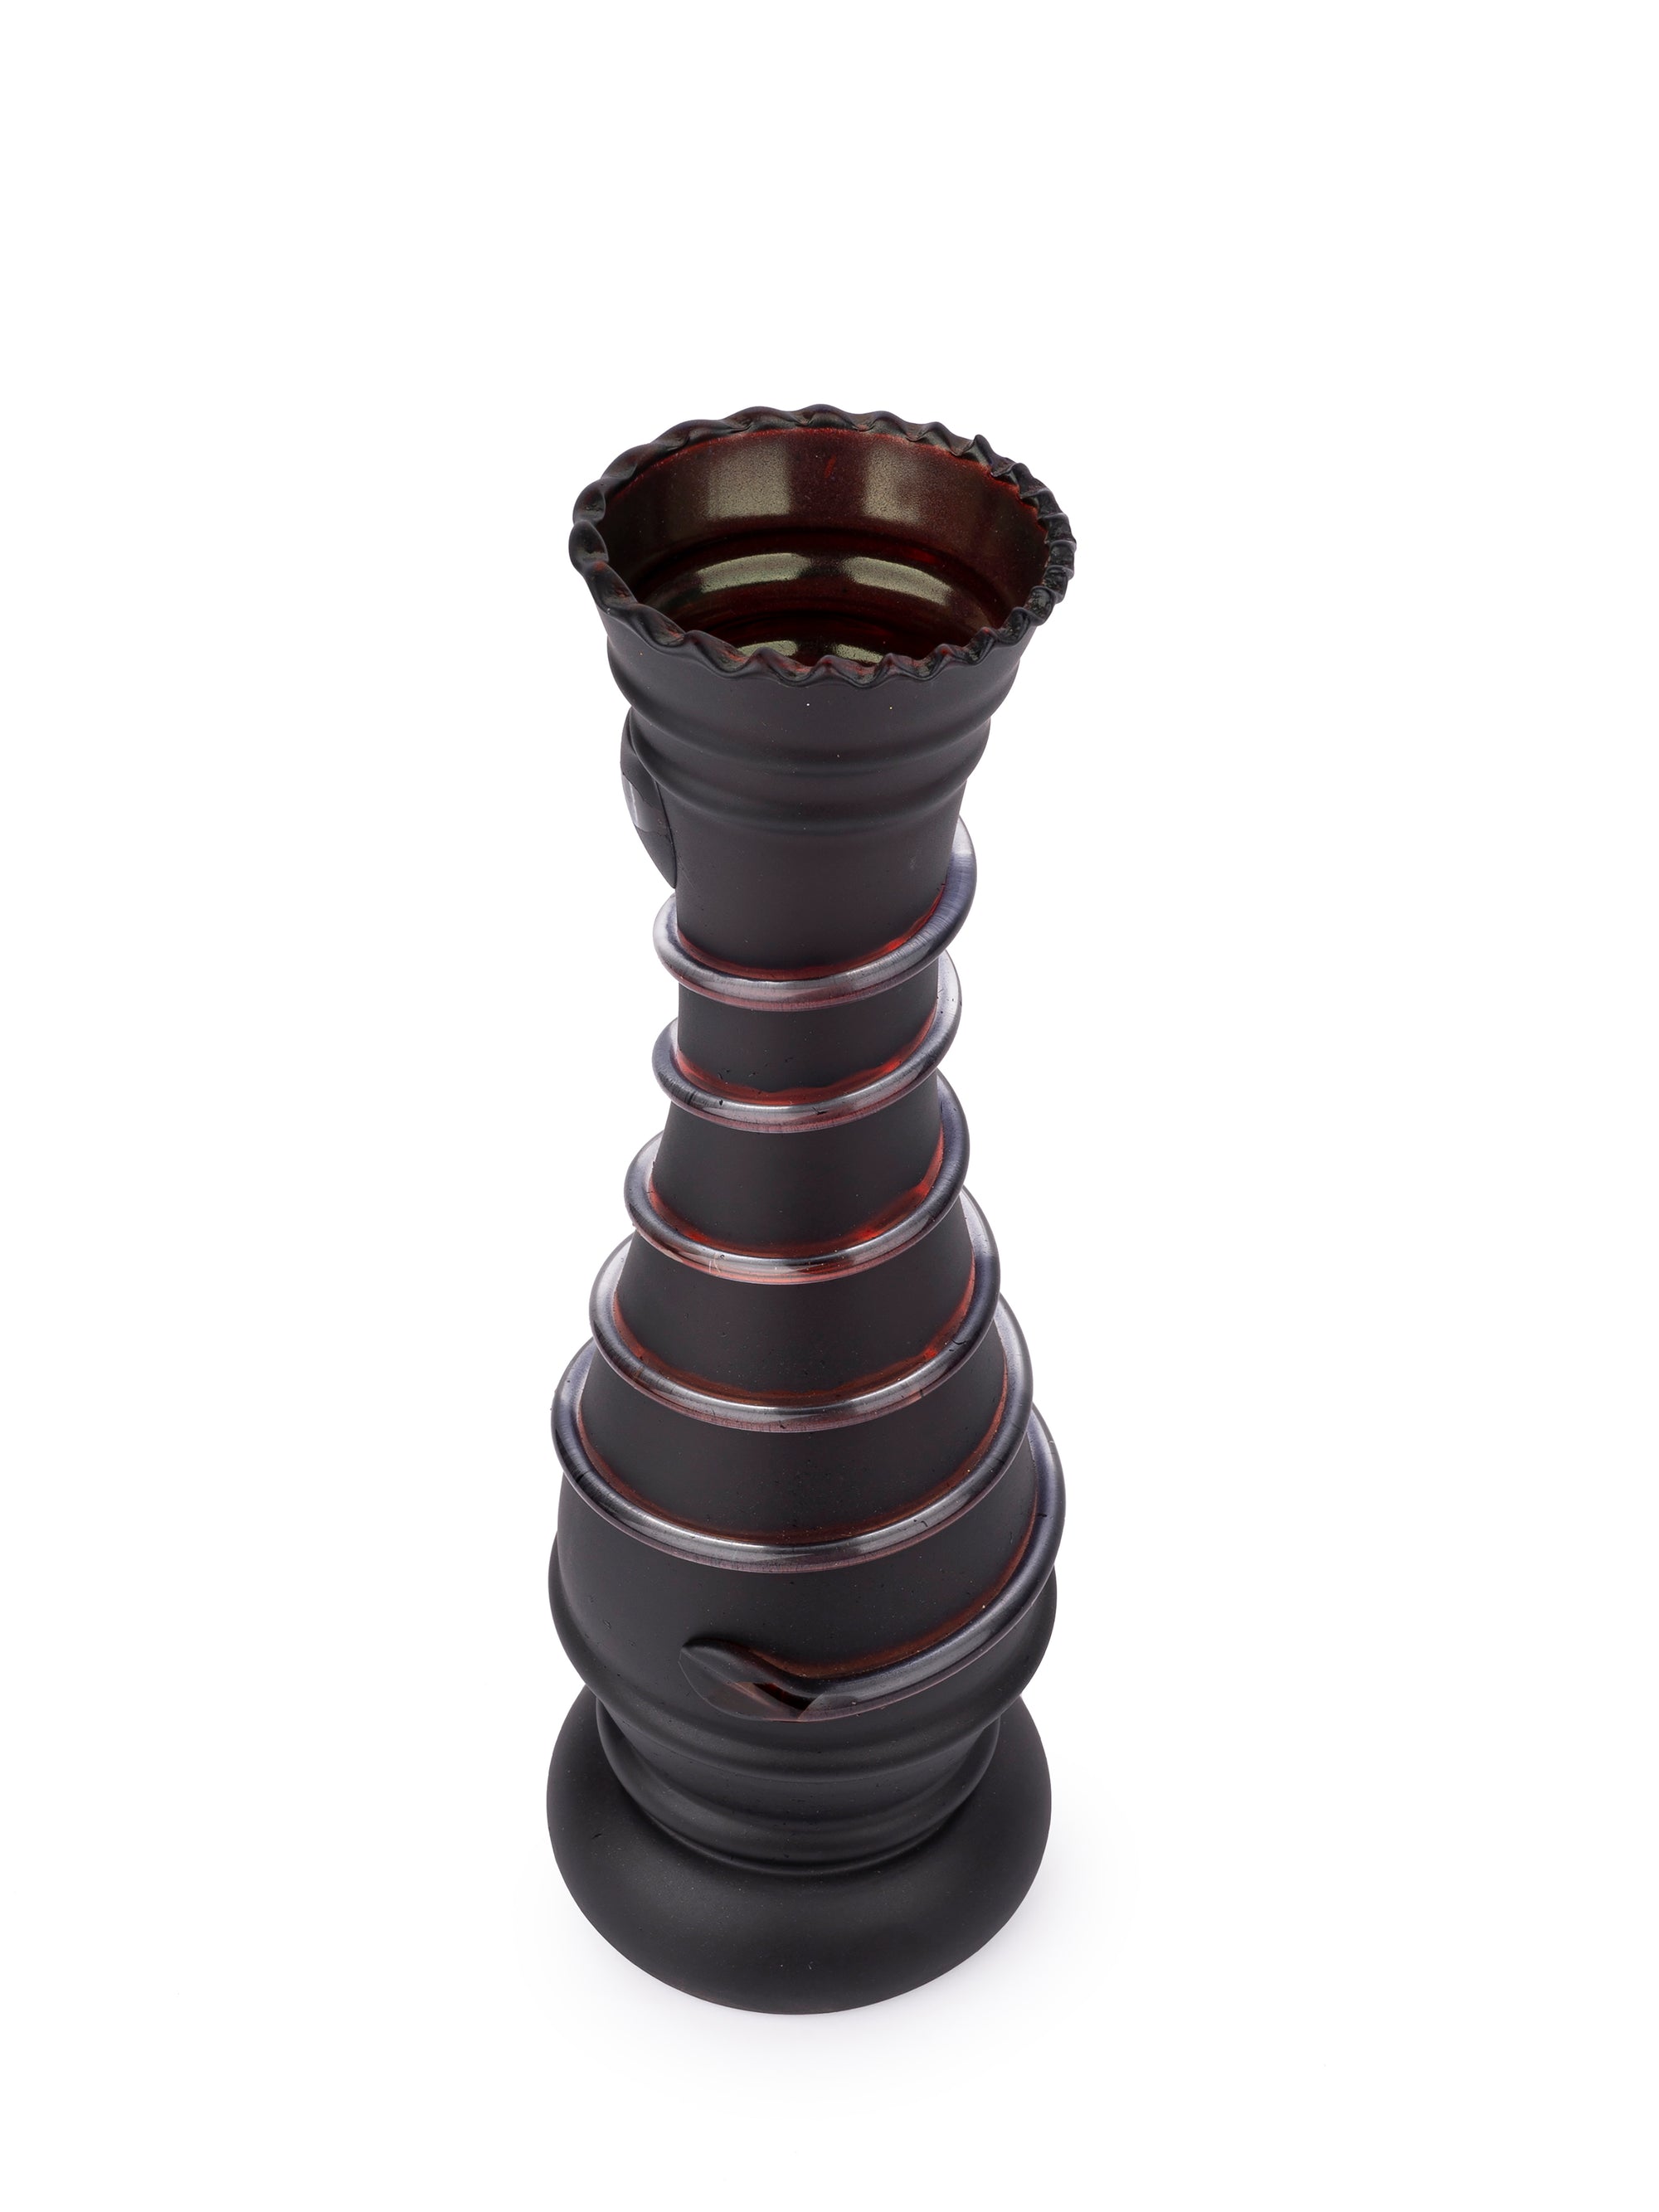 Glass Crafted Black Flower Vase with Spiral Design - 11 inches Height - The Heritage Artifacts